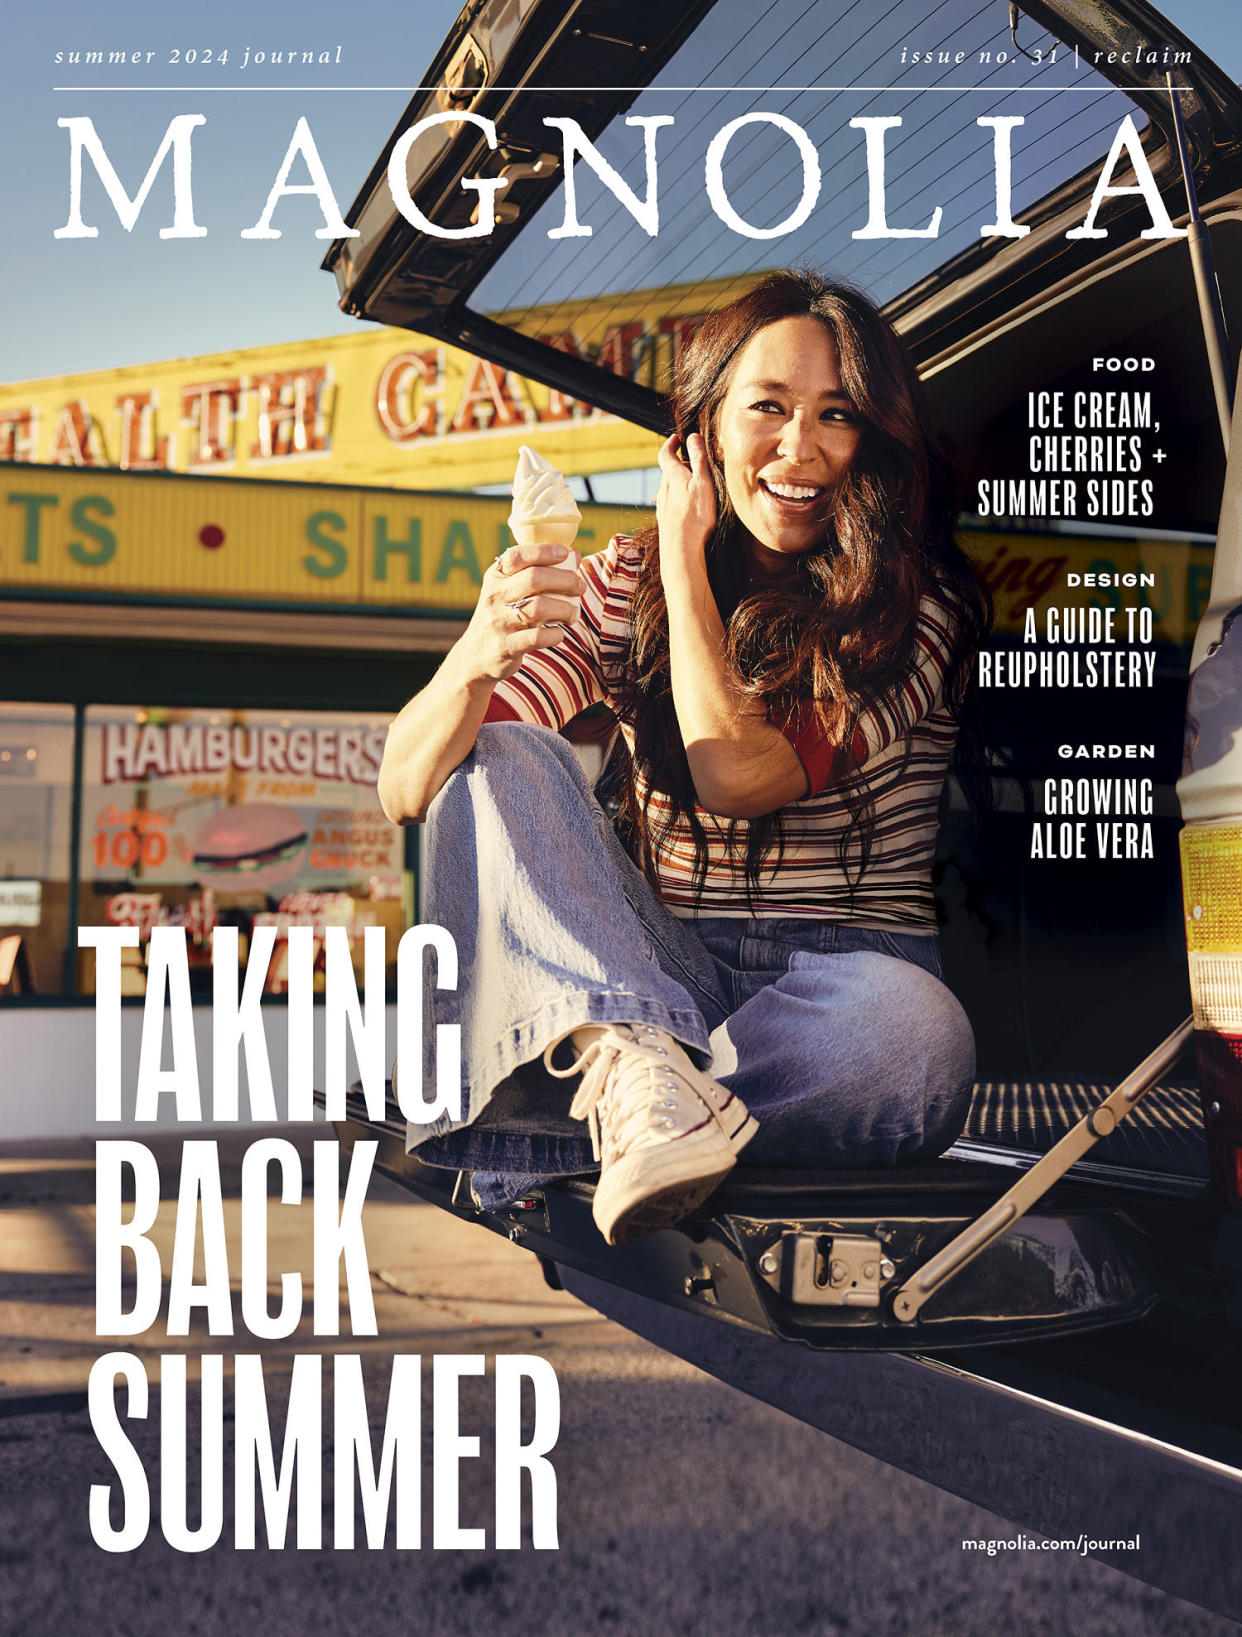 The cover of the summer issue of Magnolia Journal. (Courtesy Magnolia Journal)